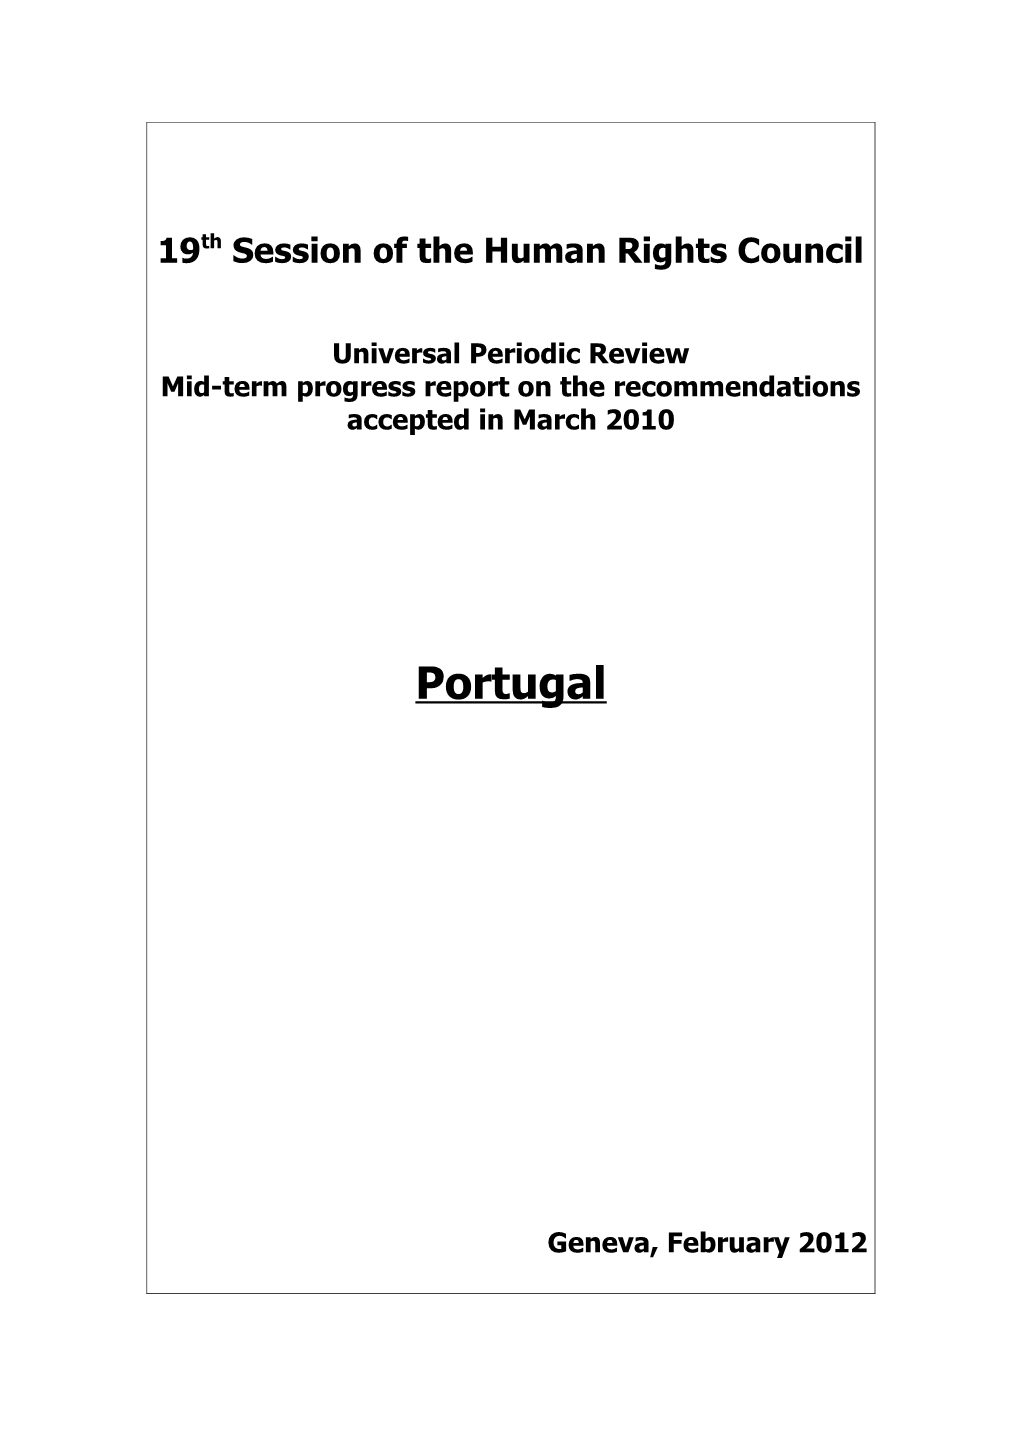 United Nations Human Rights Council Universal Periodic Review